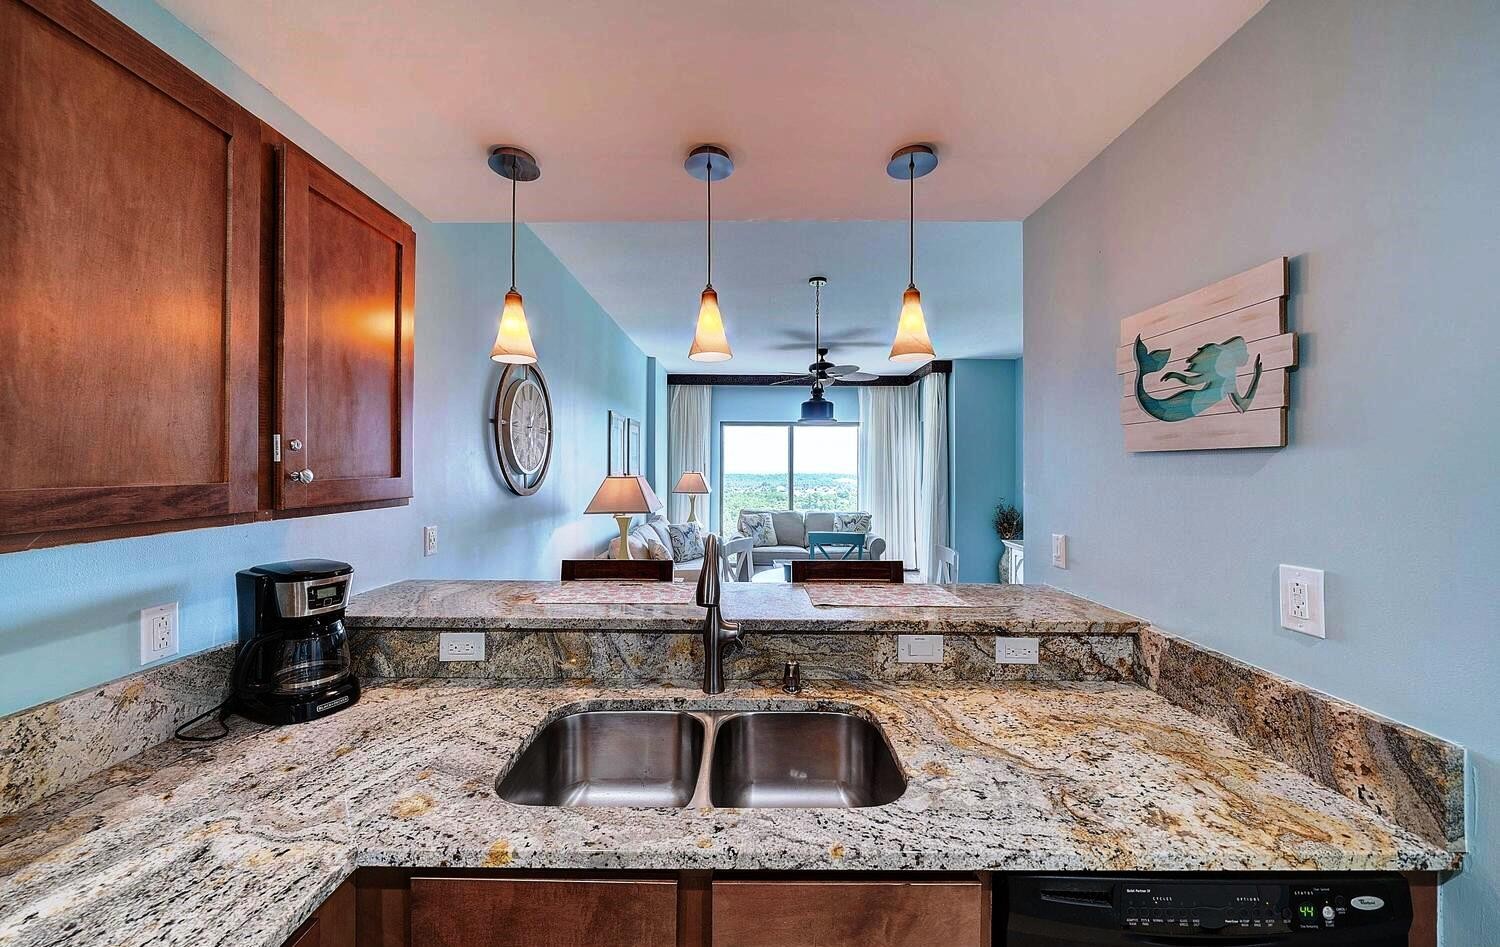 Granite counter tops and a kitchen with a view